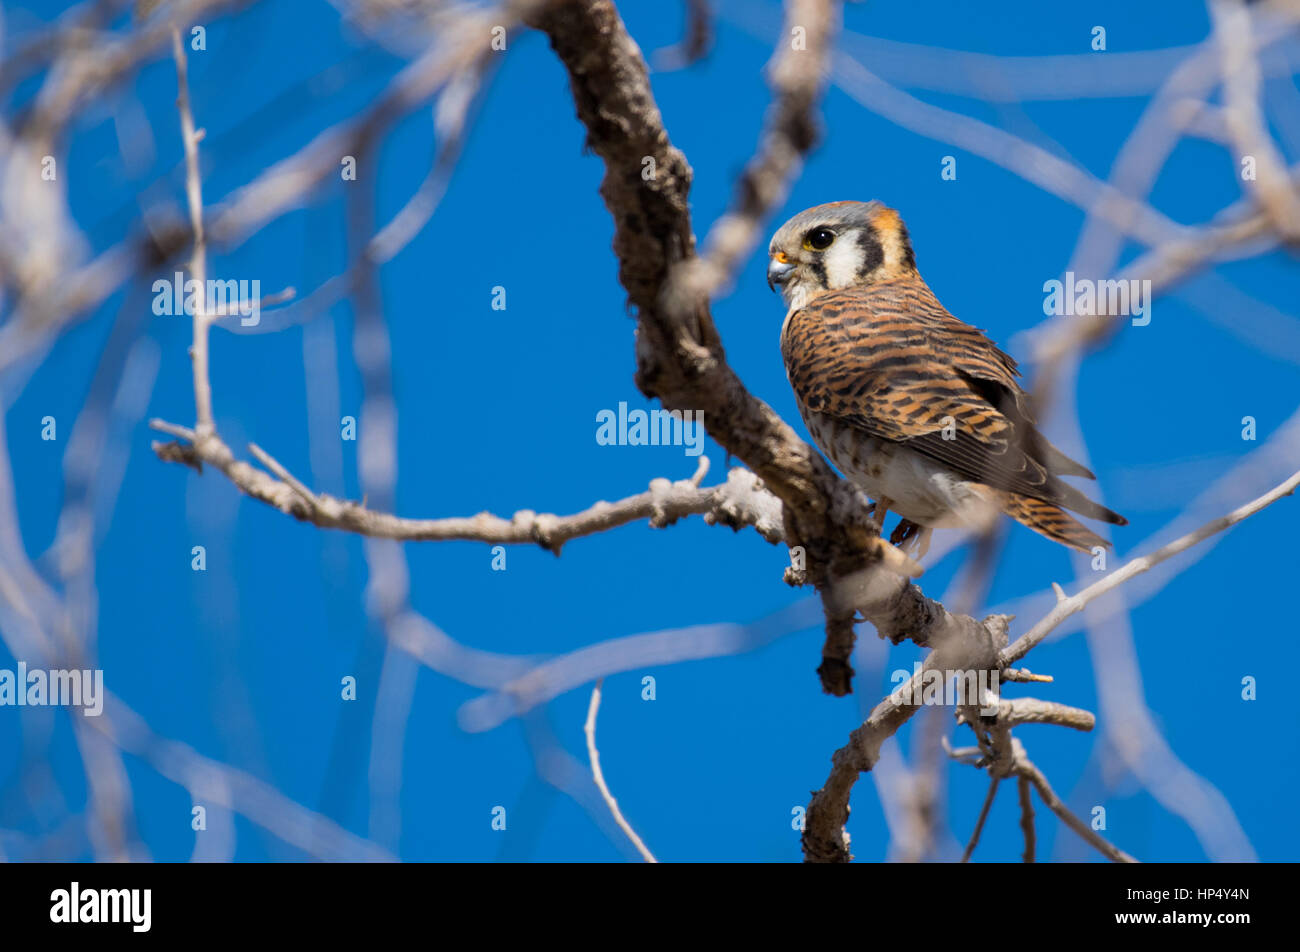 A Beautiful Male American Kestrel Perched on a Tree Branch Stock Photo